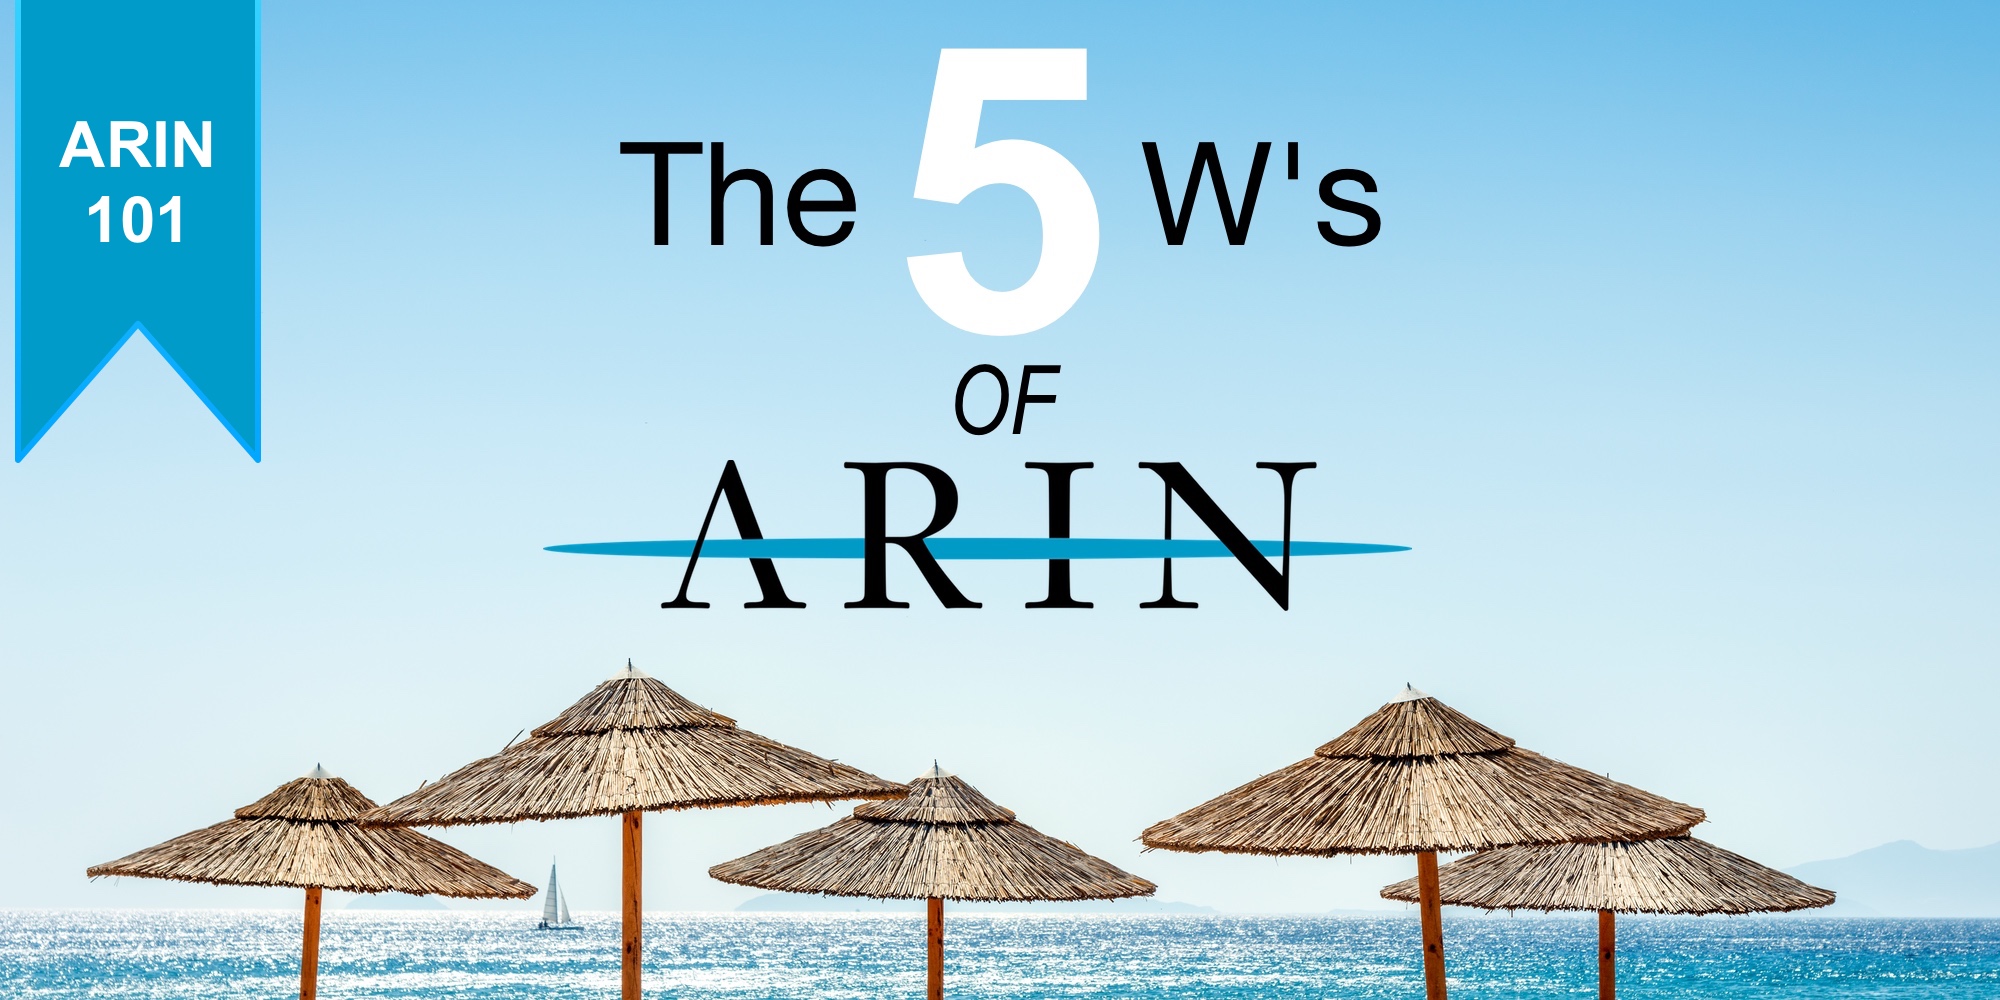 The 5 W's of ARIN